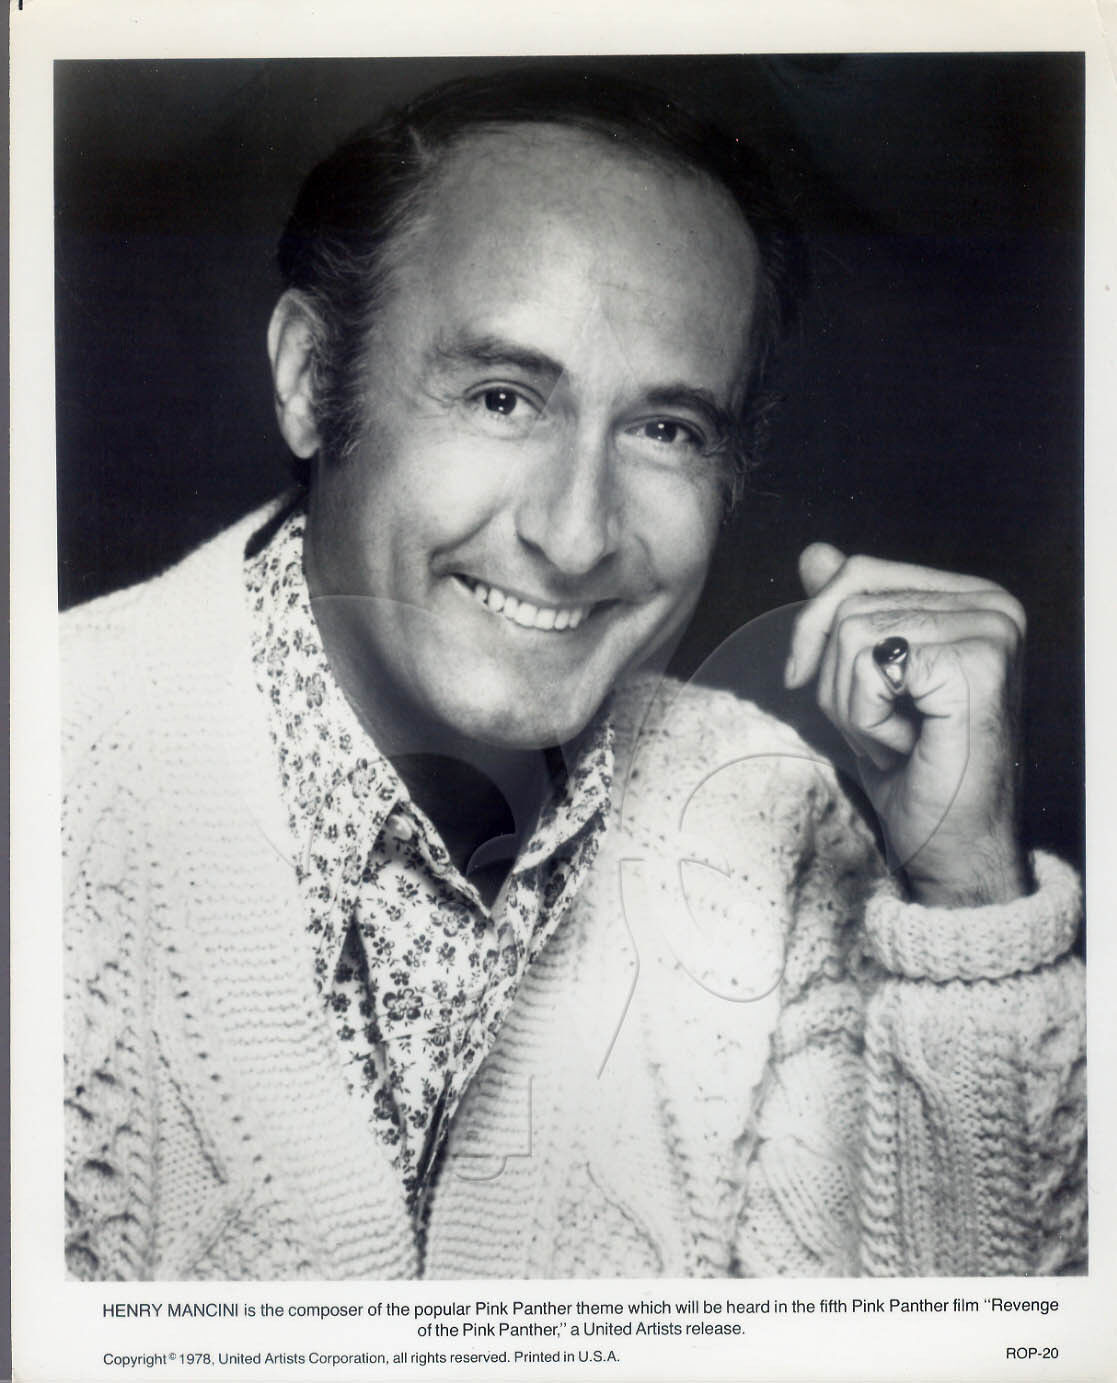 Vintage Photo 1978 HENRY MANCINI Composer PINK PANTHER Series United Artists